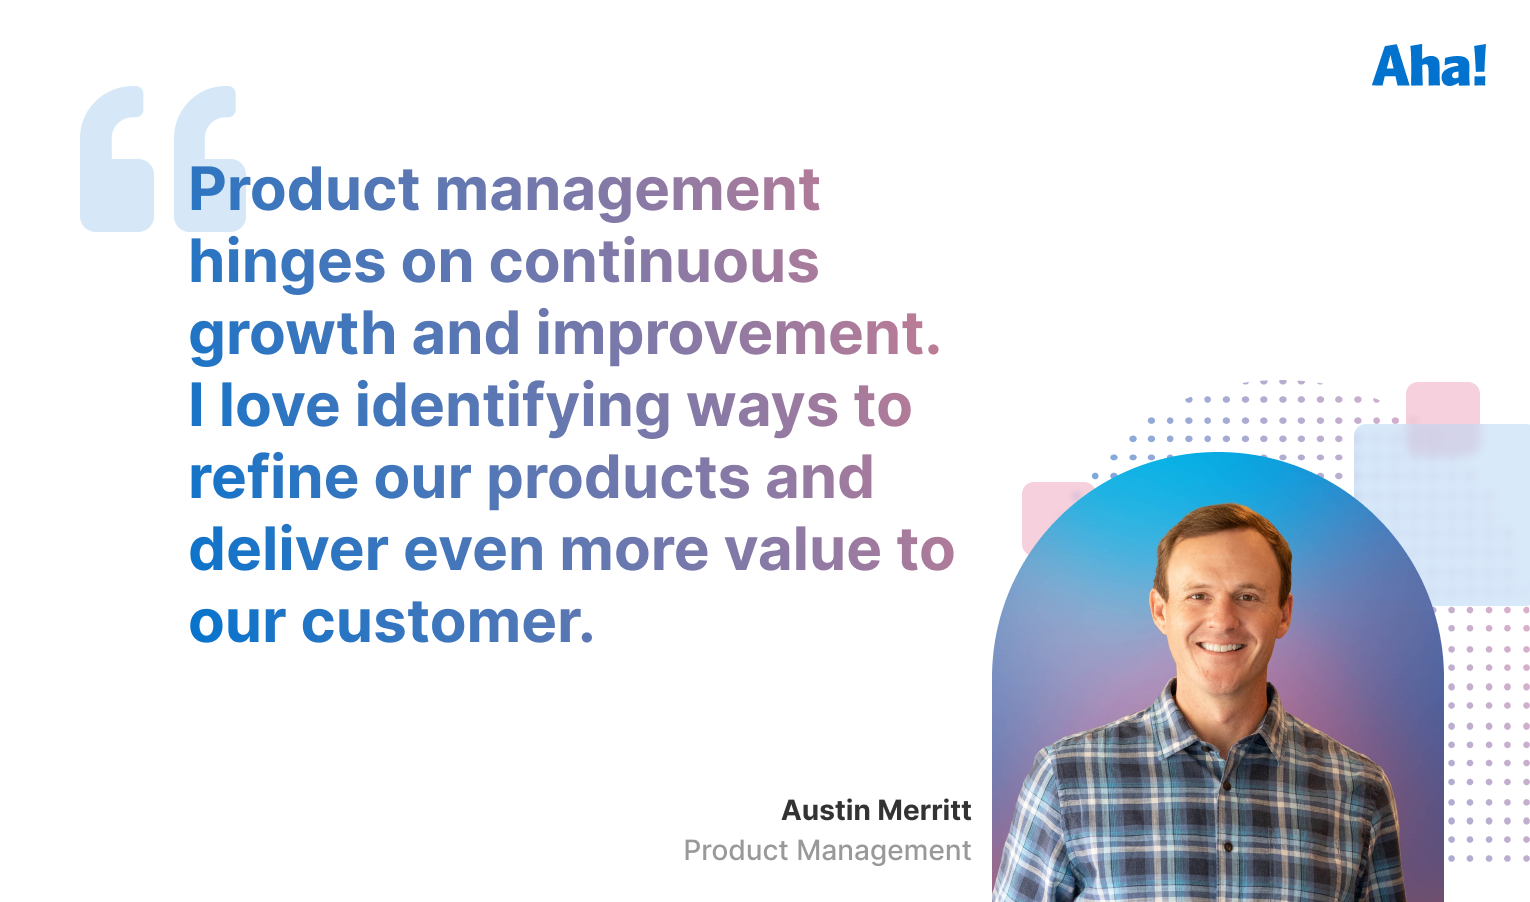 PM, Austin Merritt, shares his view on product management 